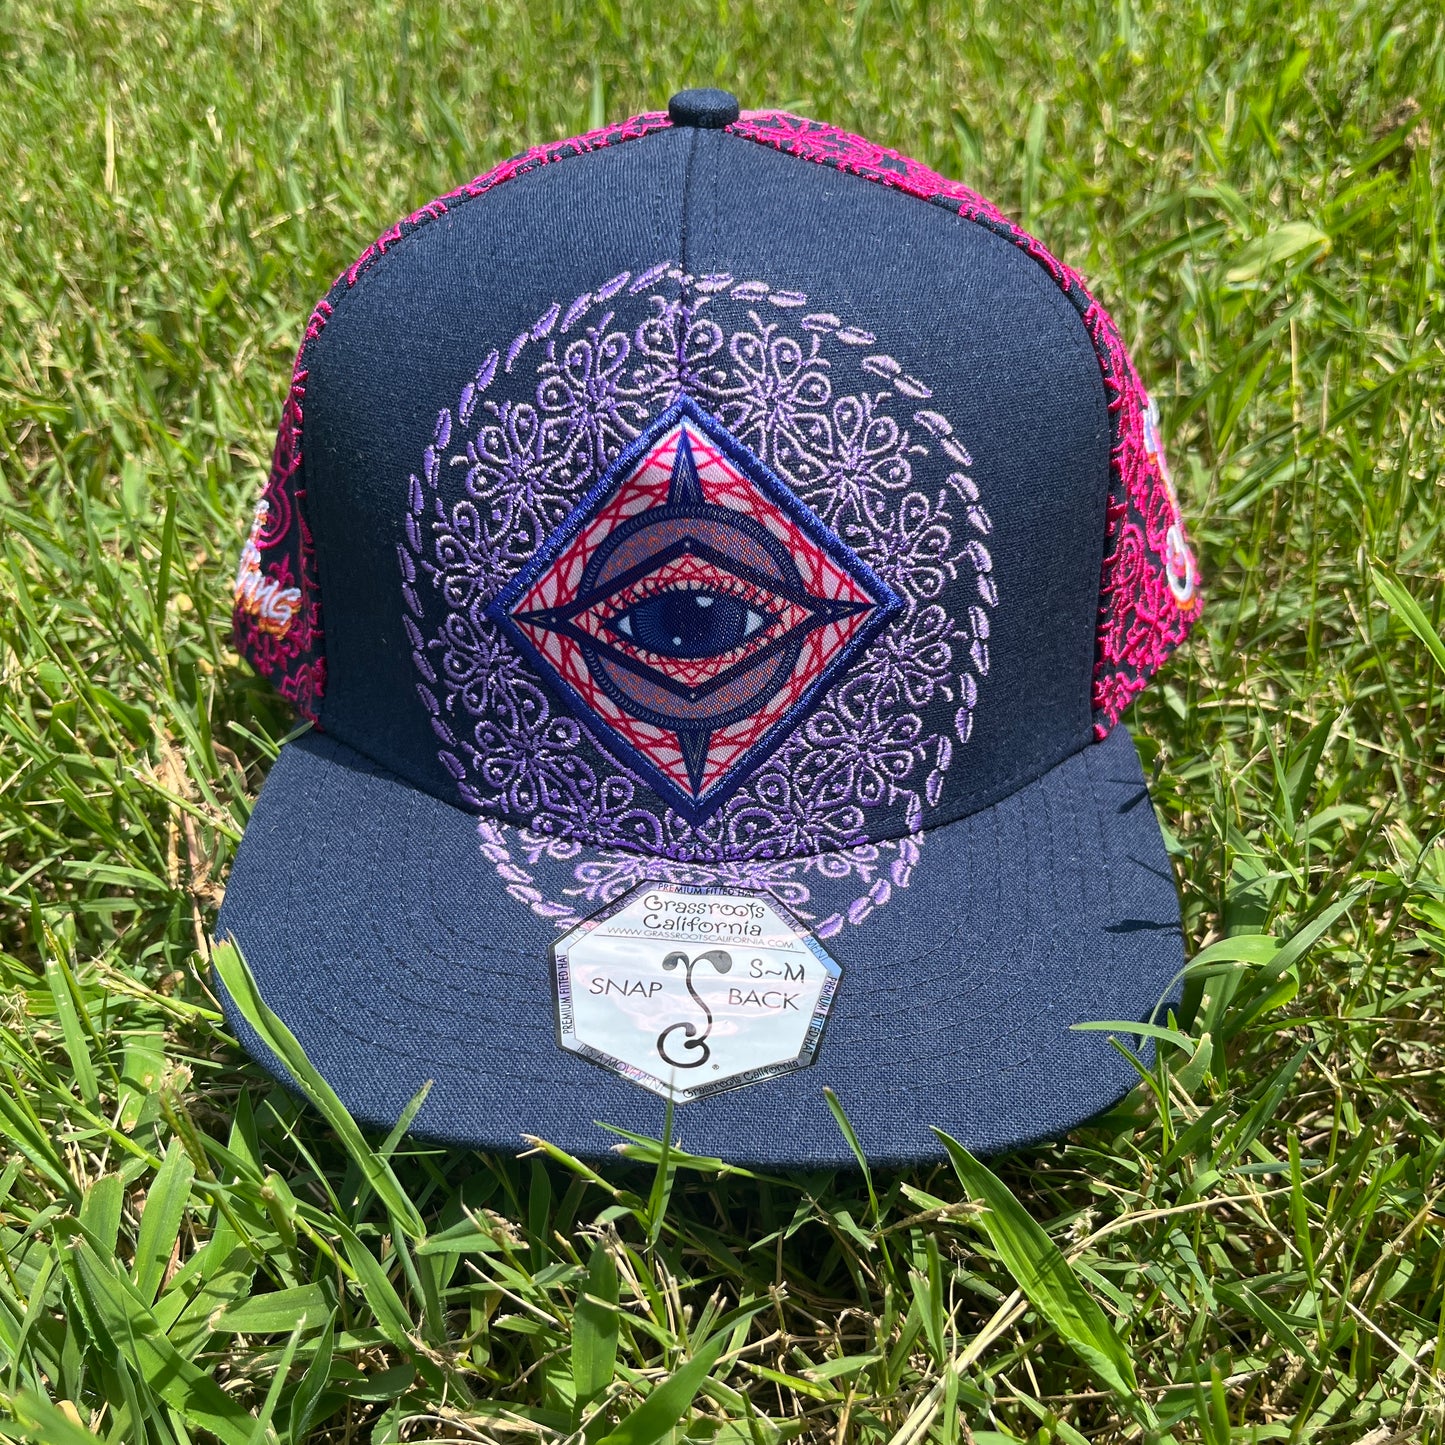 HAT: Grassroots Fitted Flat Brim